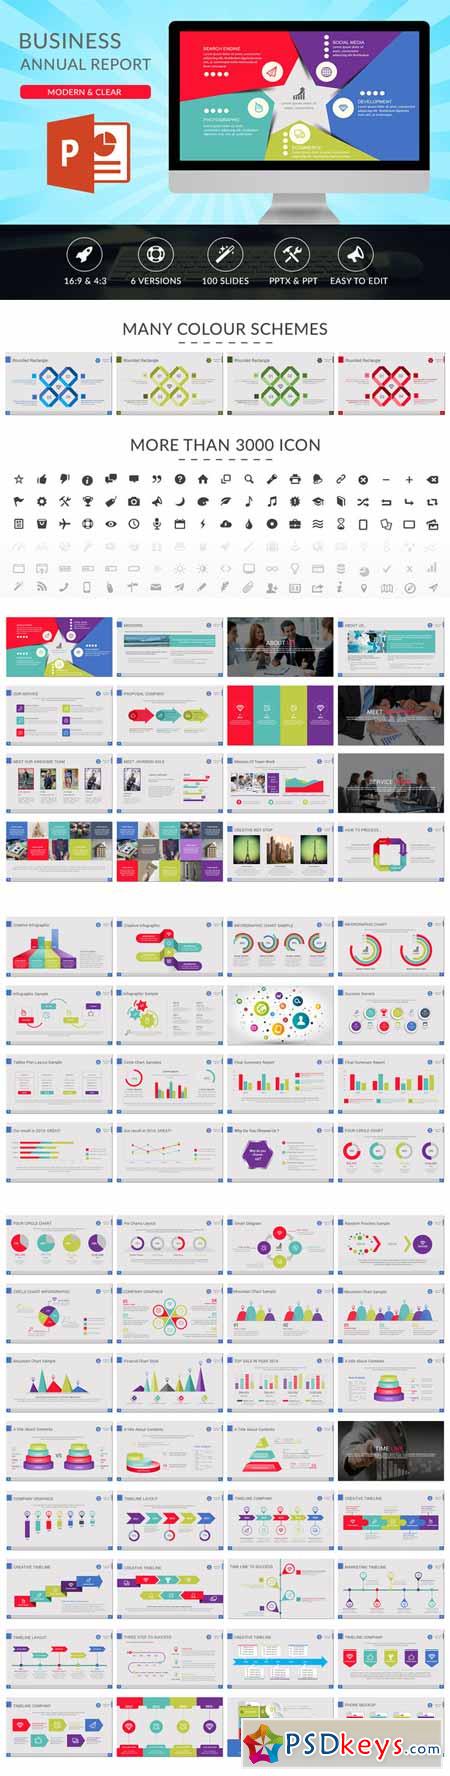 Business Annual Report Powerpoint 508607